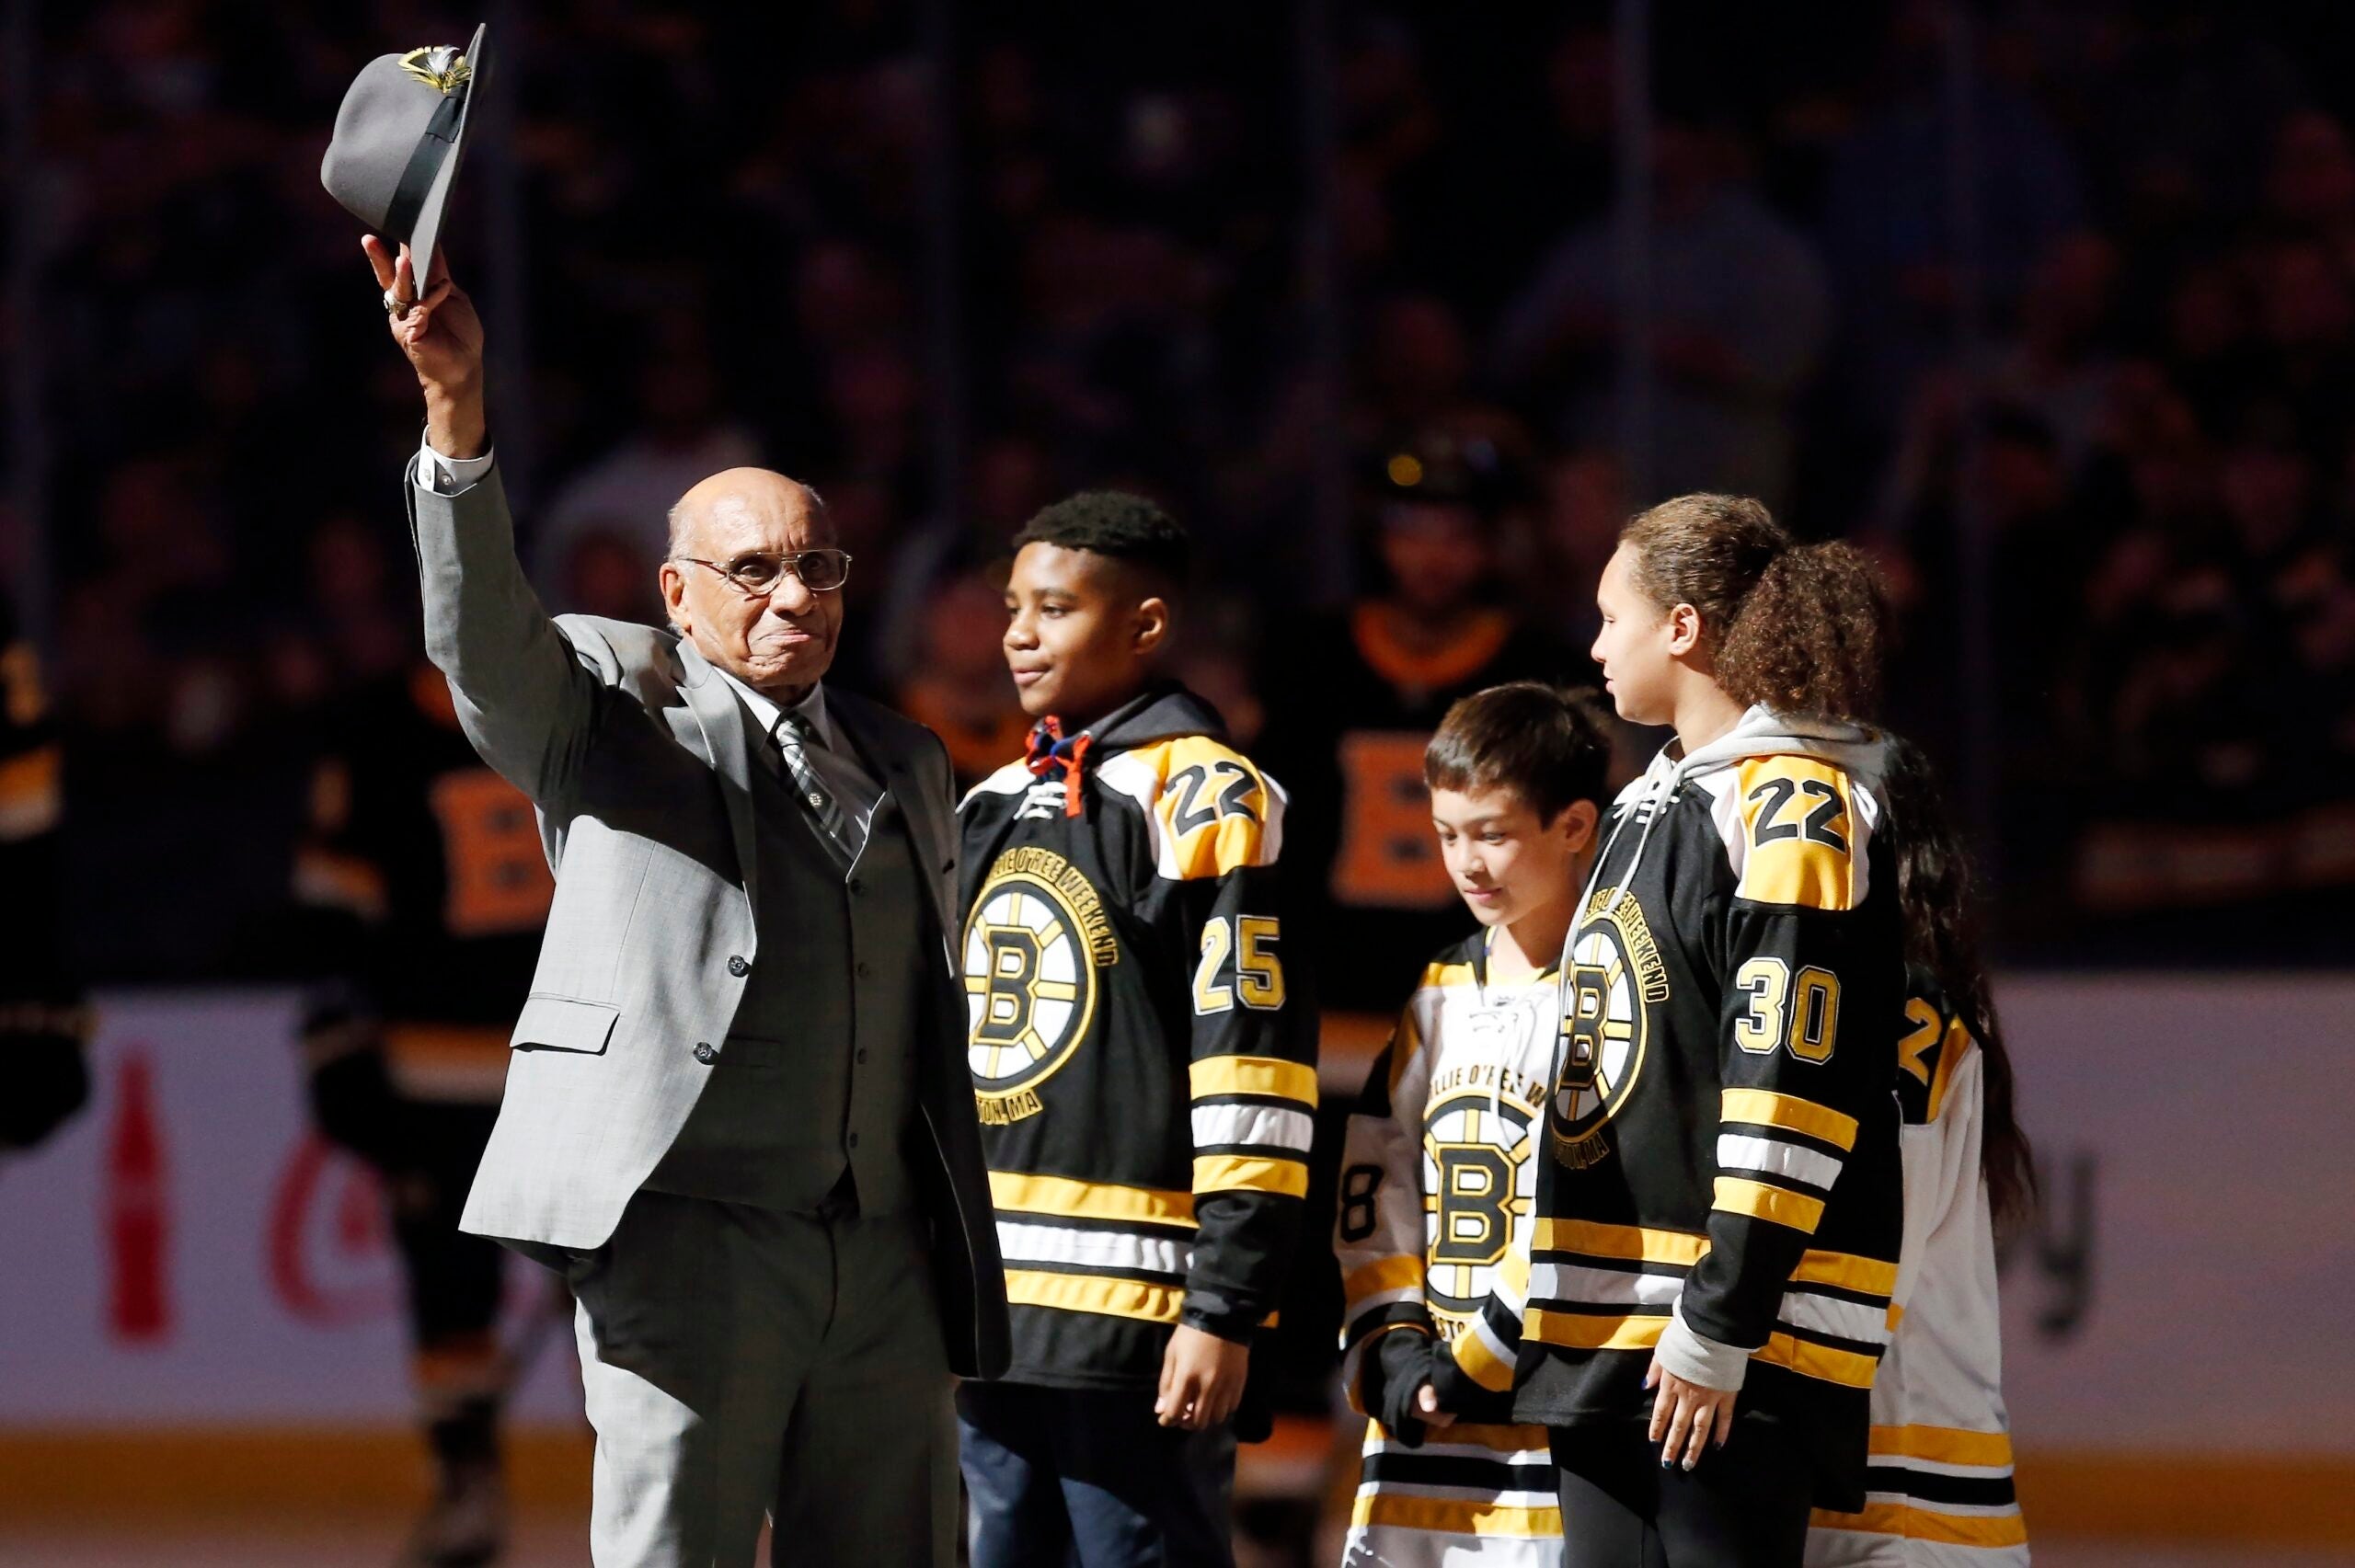 Willie O'Ree looked past and fought through racism to become NHL's 1st  Black player